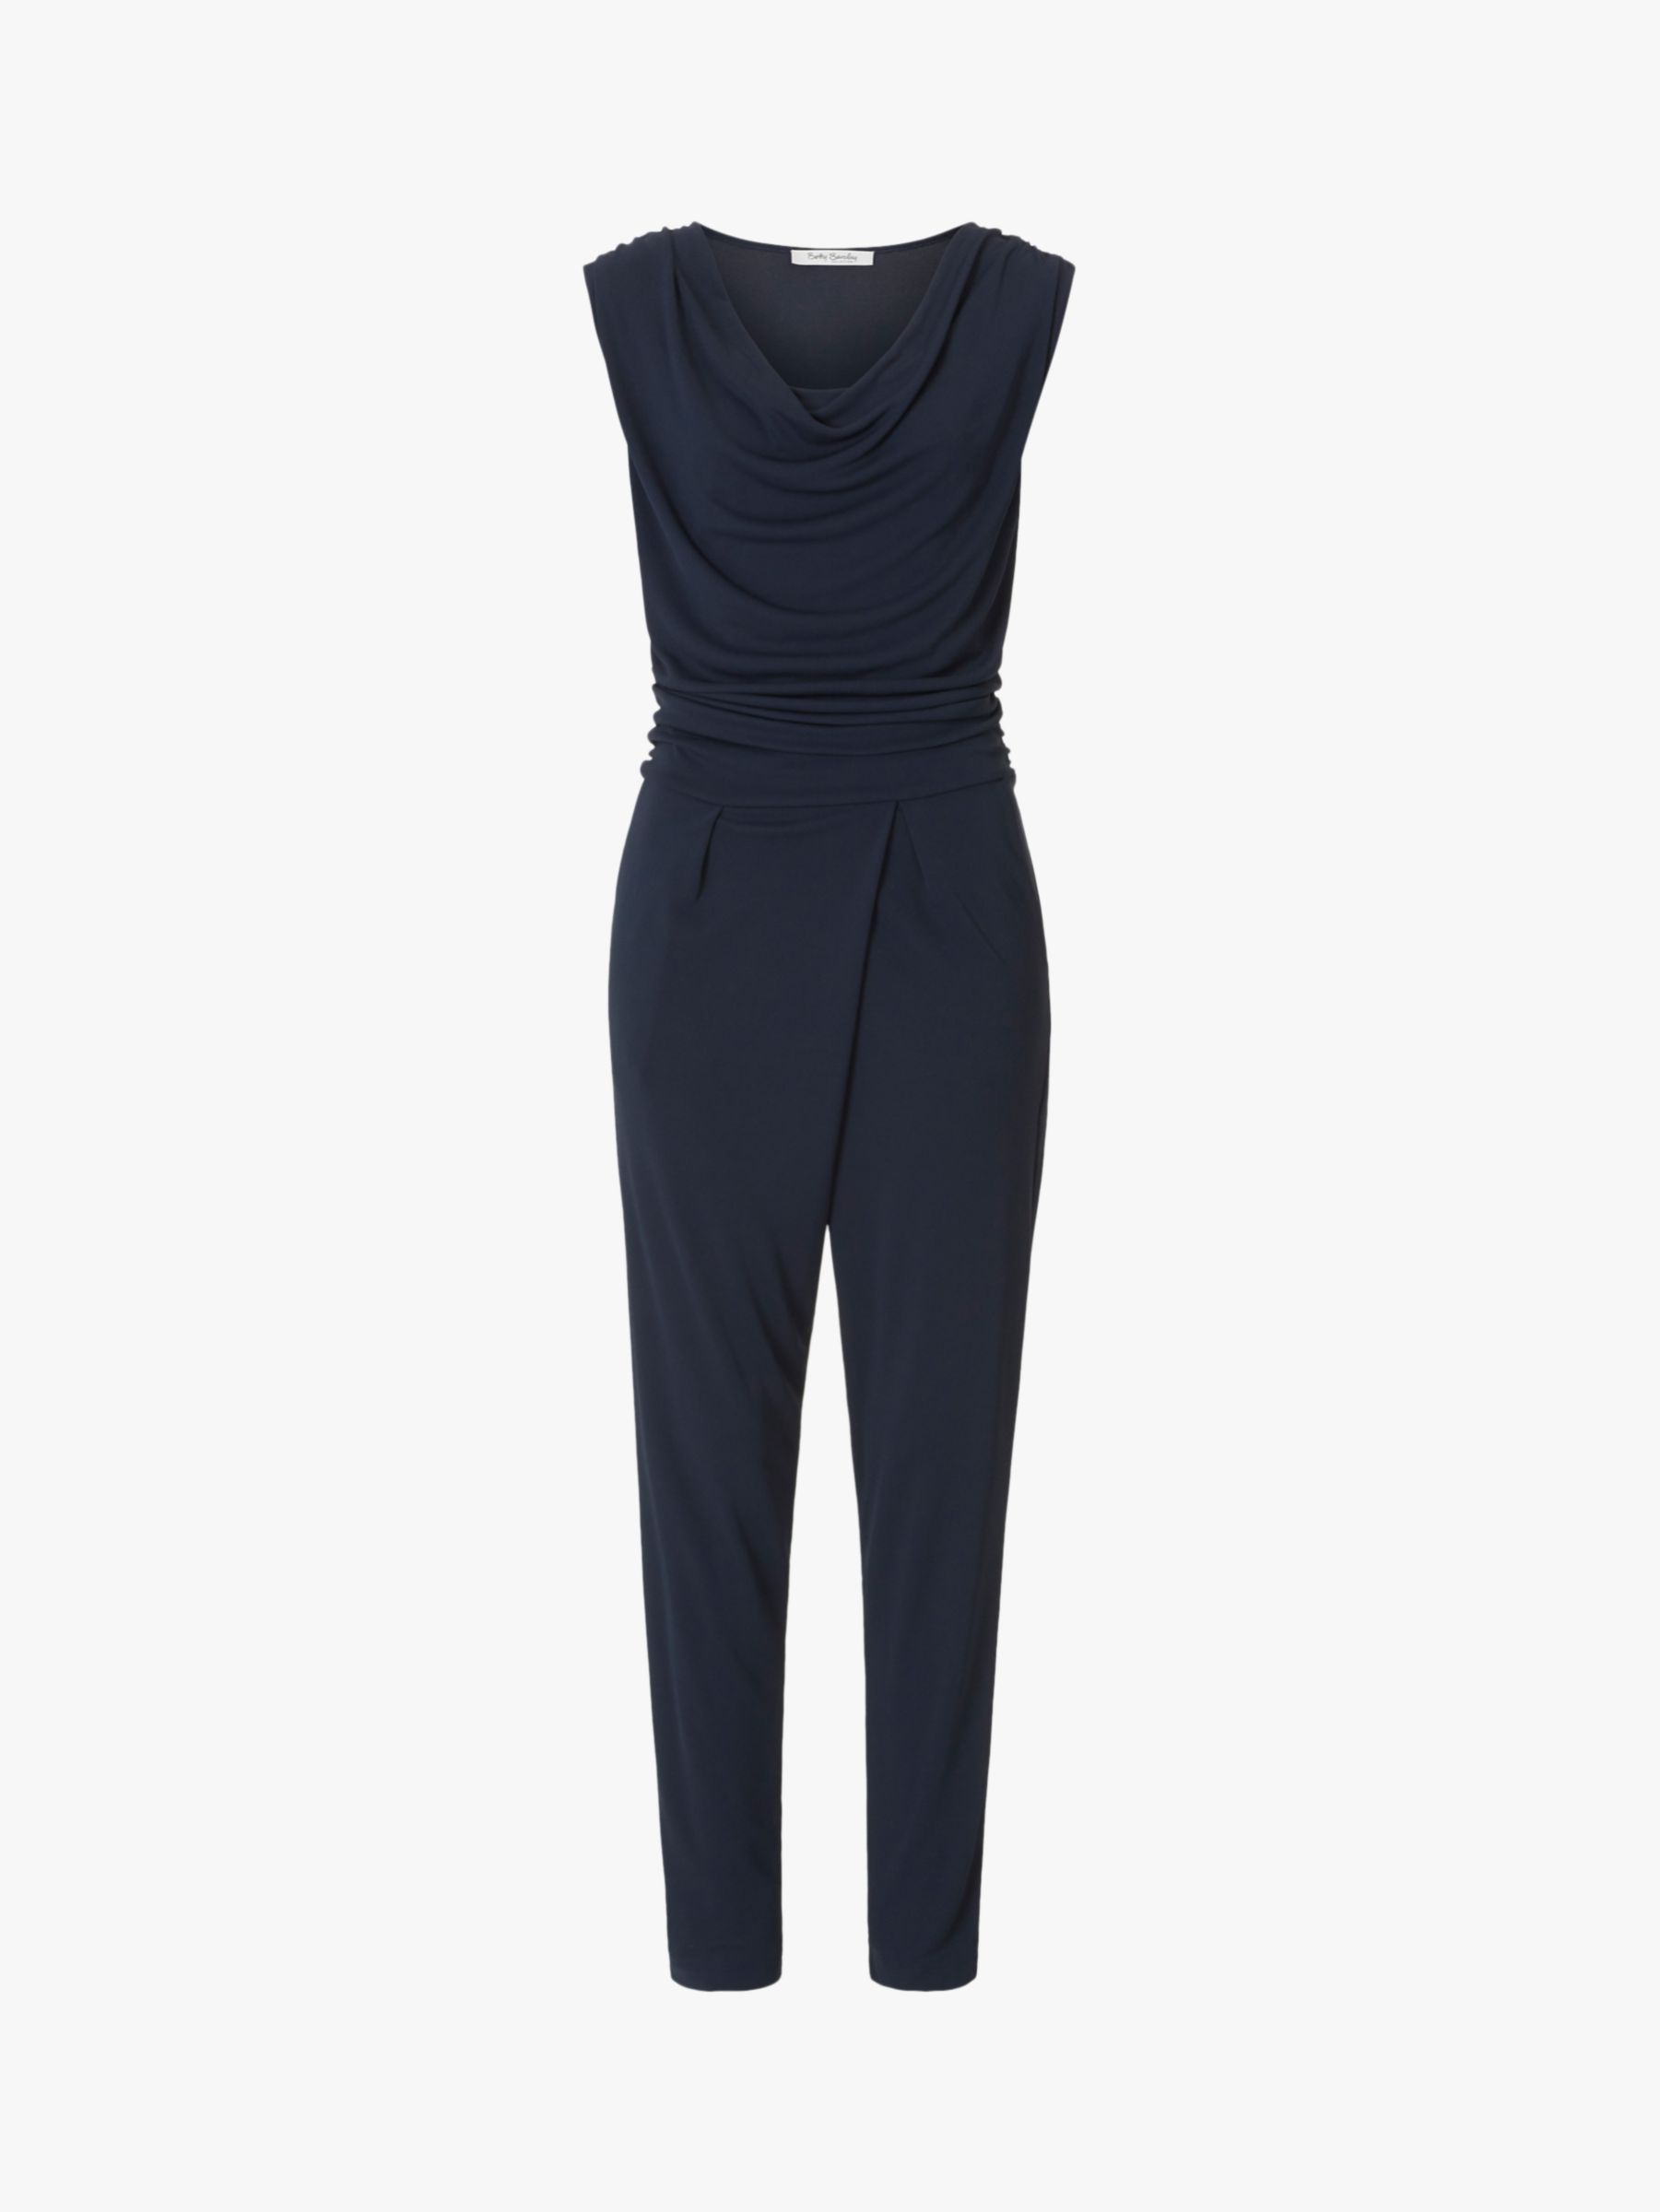 jumpsuit betty barclay